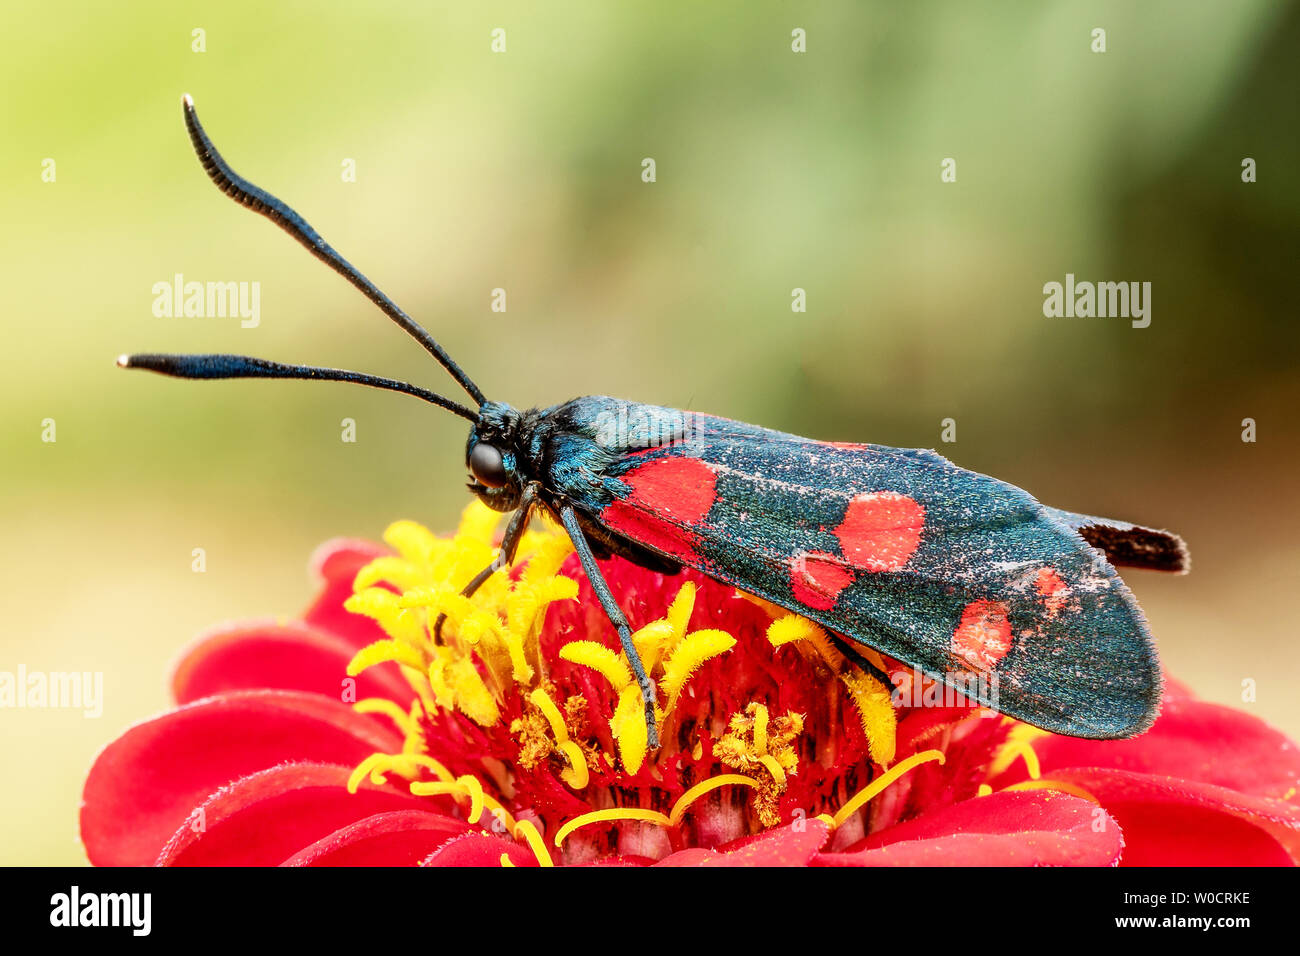 Butterfly with red dots on a red flower. Macro shot with blurred background. Stock Photo